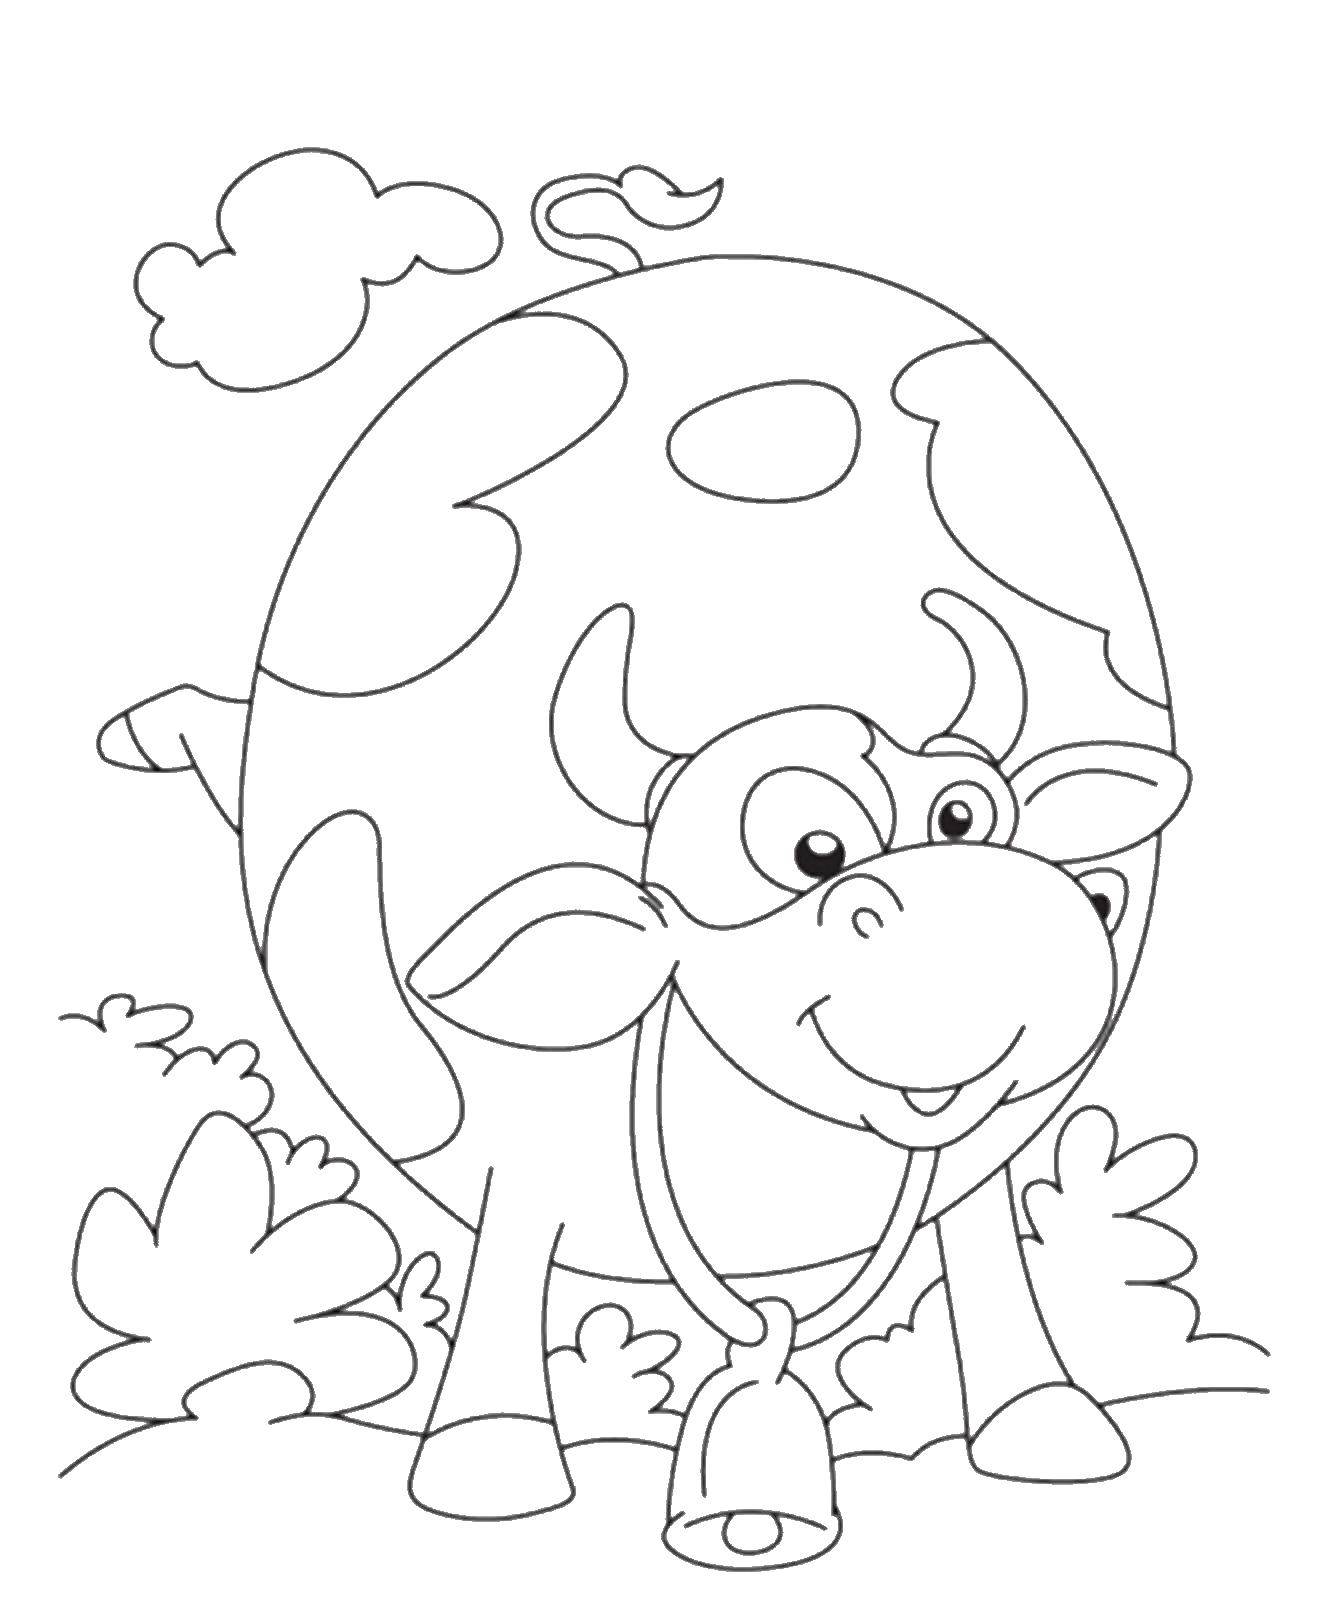 Coloring Cow with bell. Category Animals. Tags:  animals, cow.